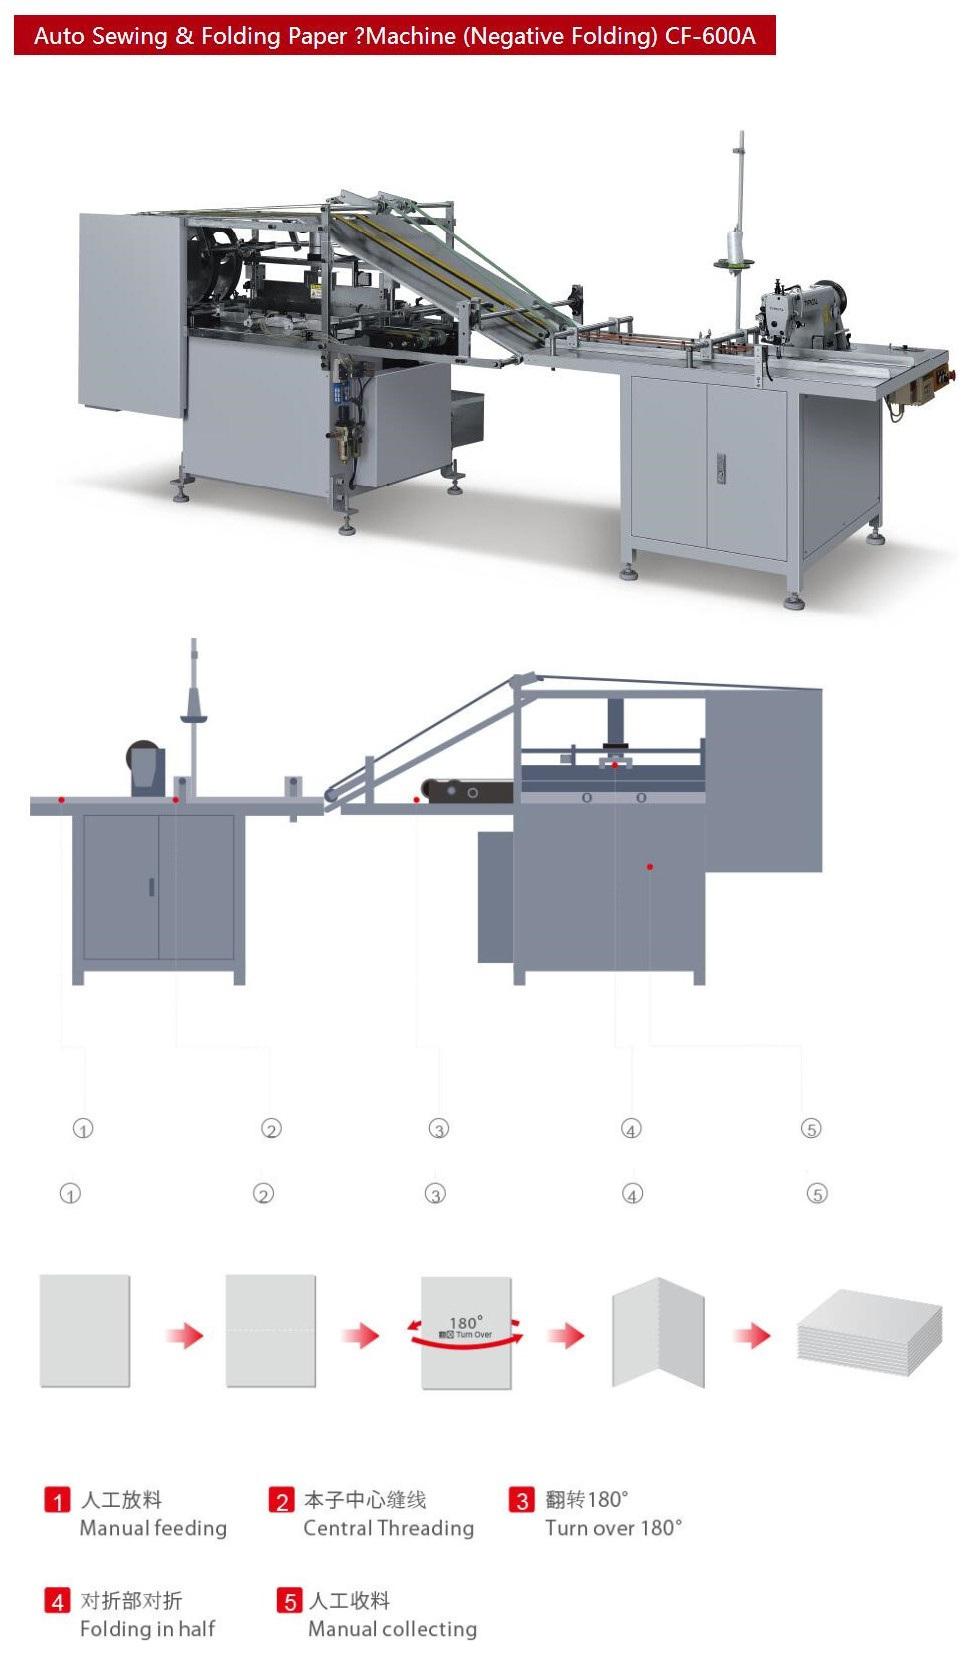 Book Paper Sewing Machine for Catalogues Sewing CF-600an